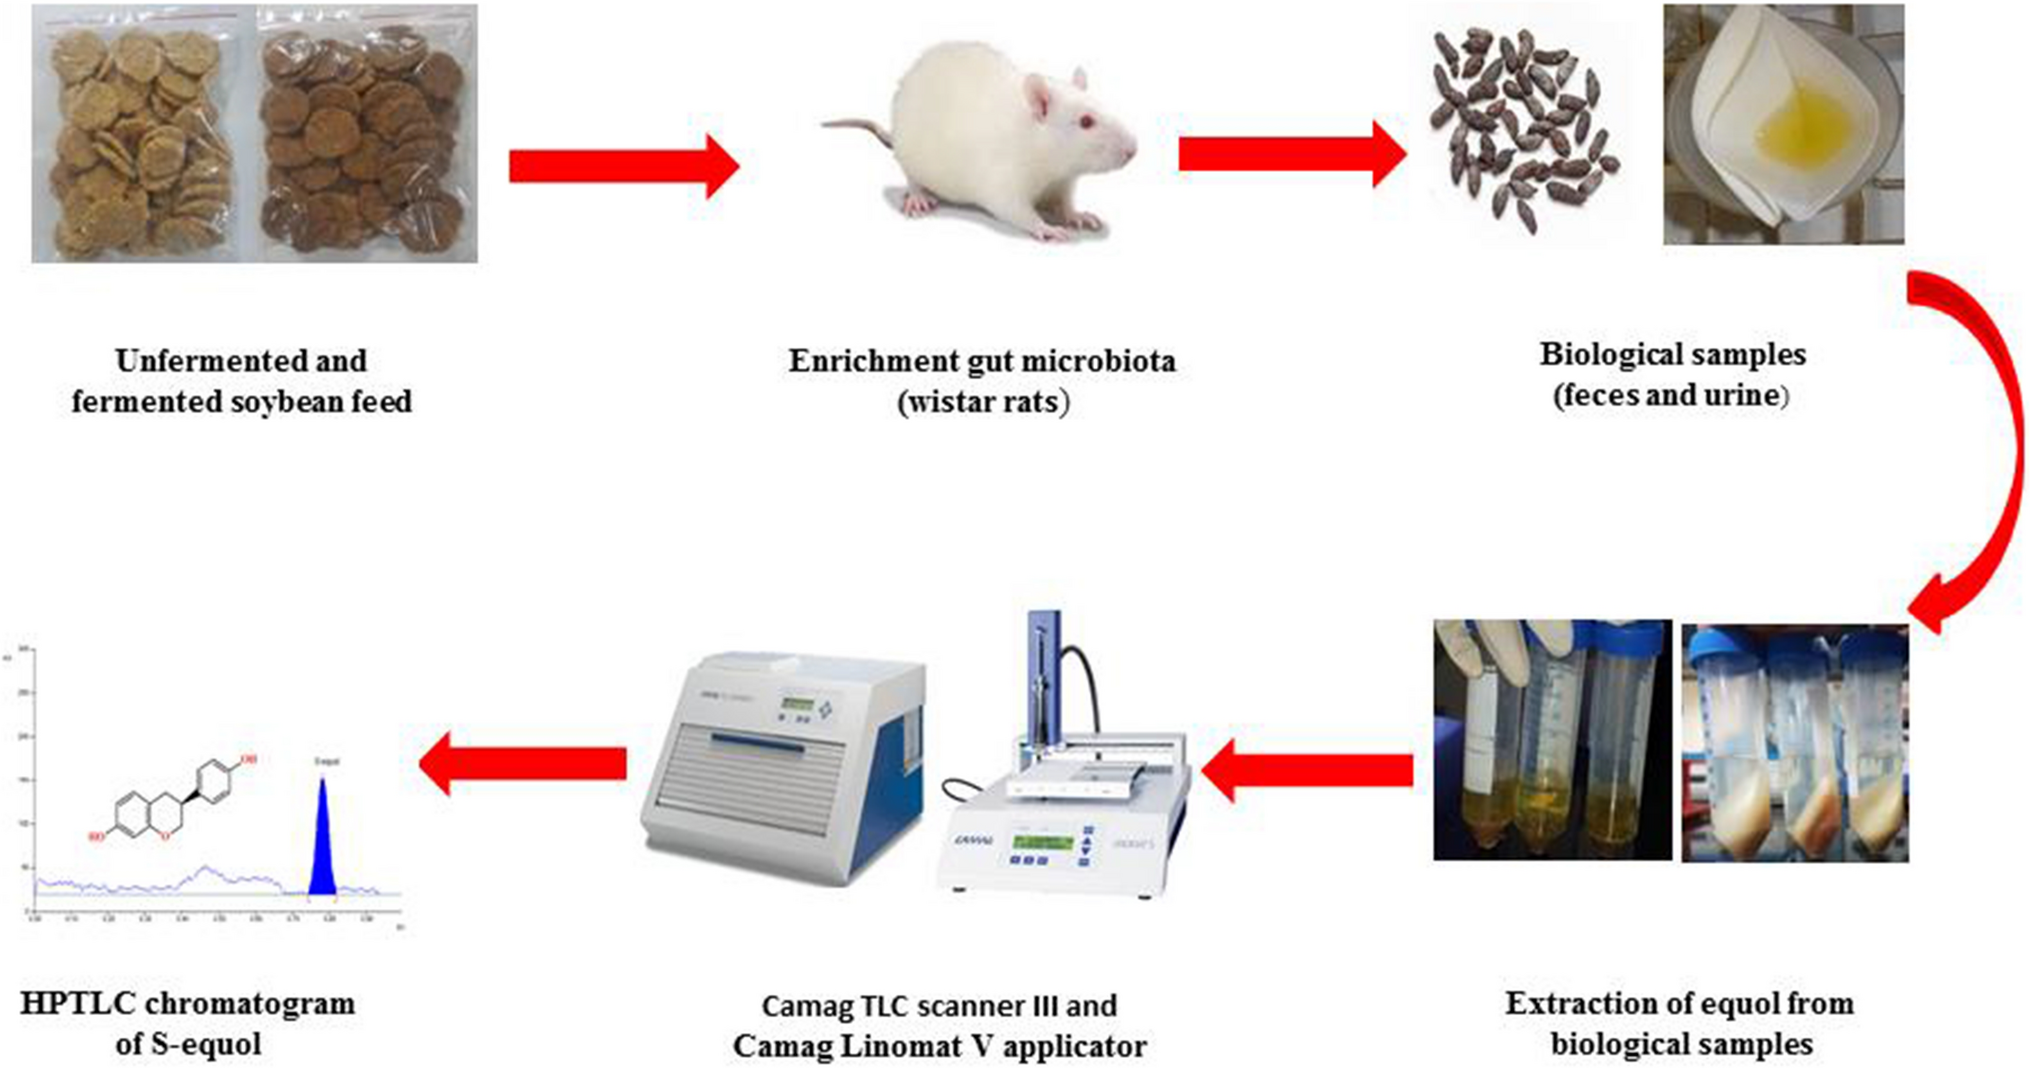 Development of a high-performance thin-layer chromatography method for the rapid quantification of S-equol in biological samples of albino Wistar rats